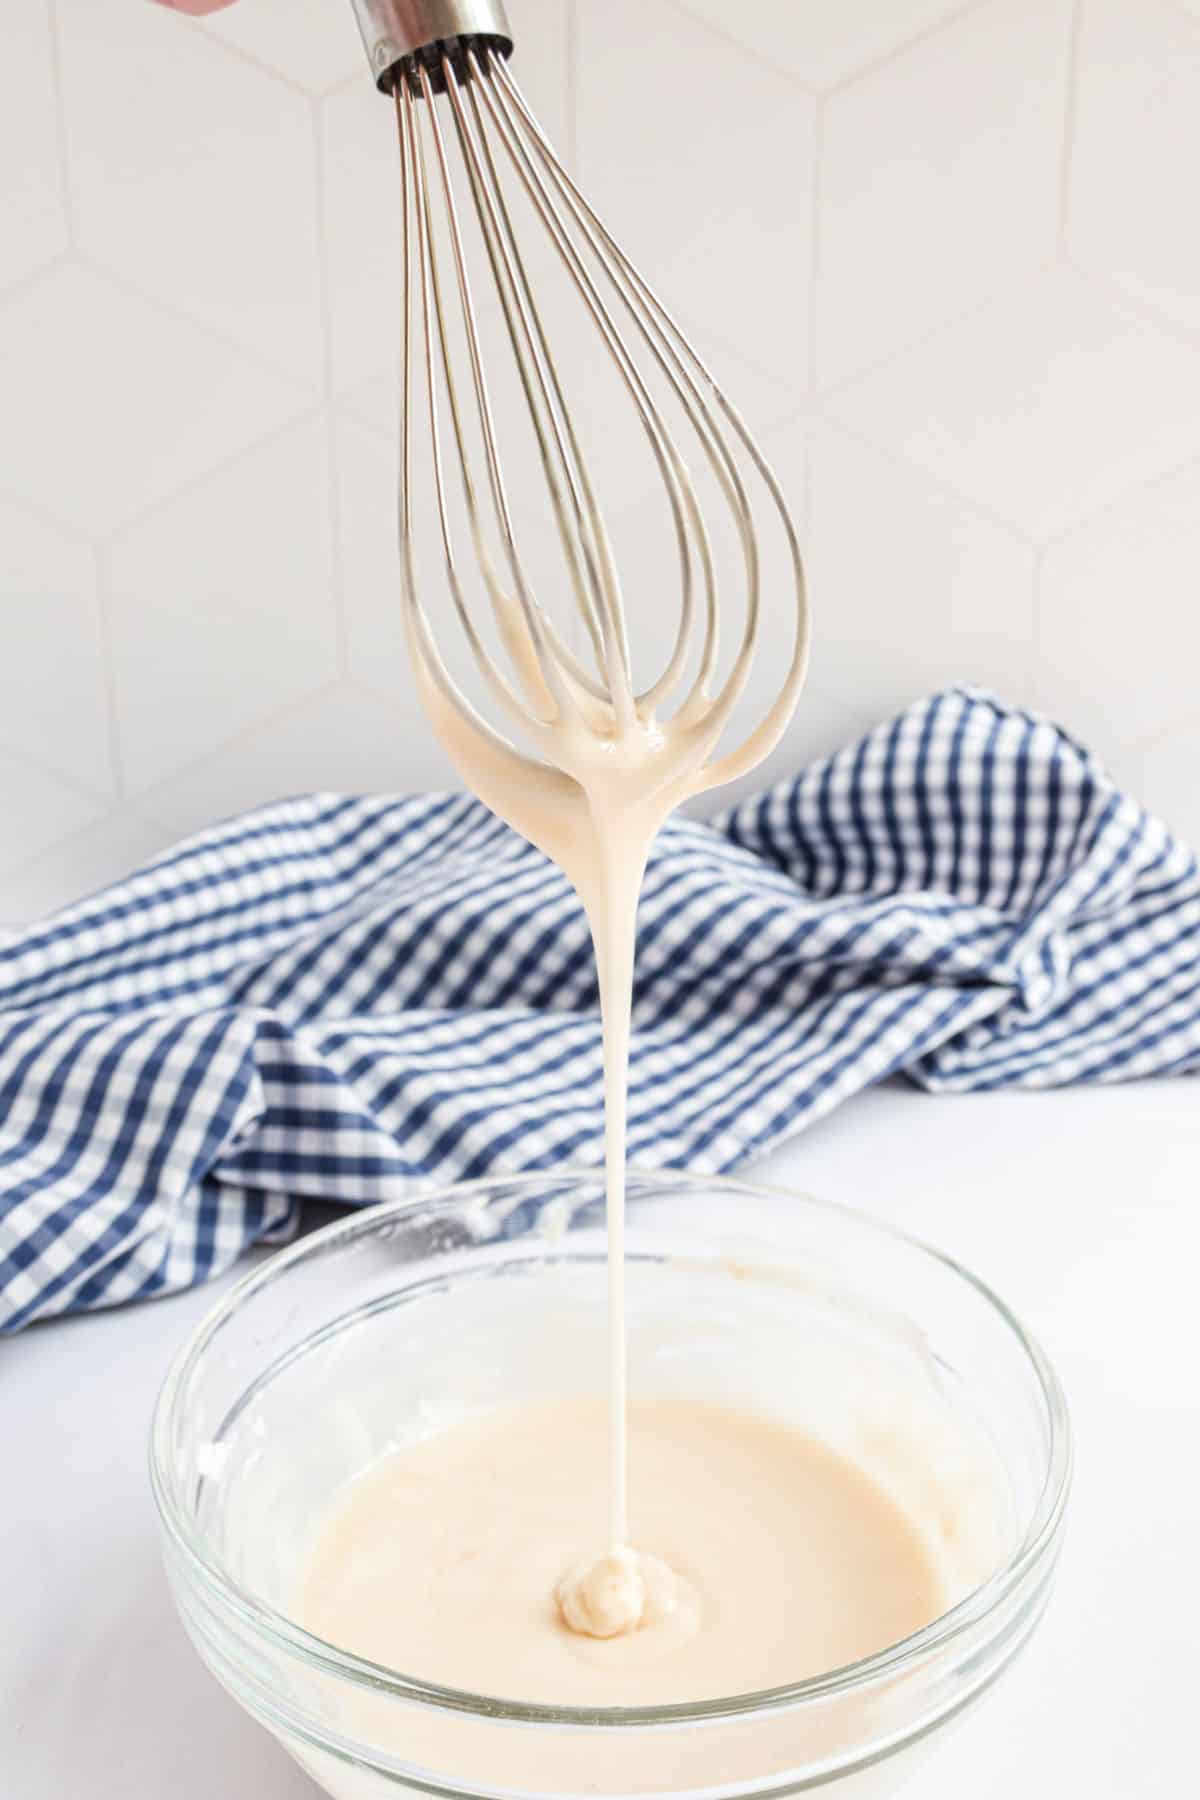 Vanilla icing dripping off a whisk into a bowl.